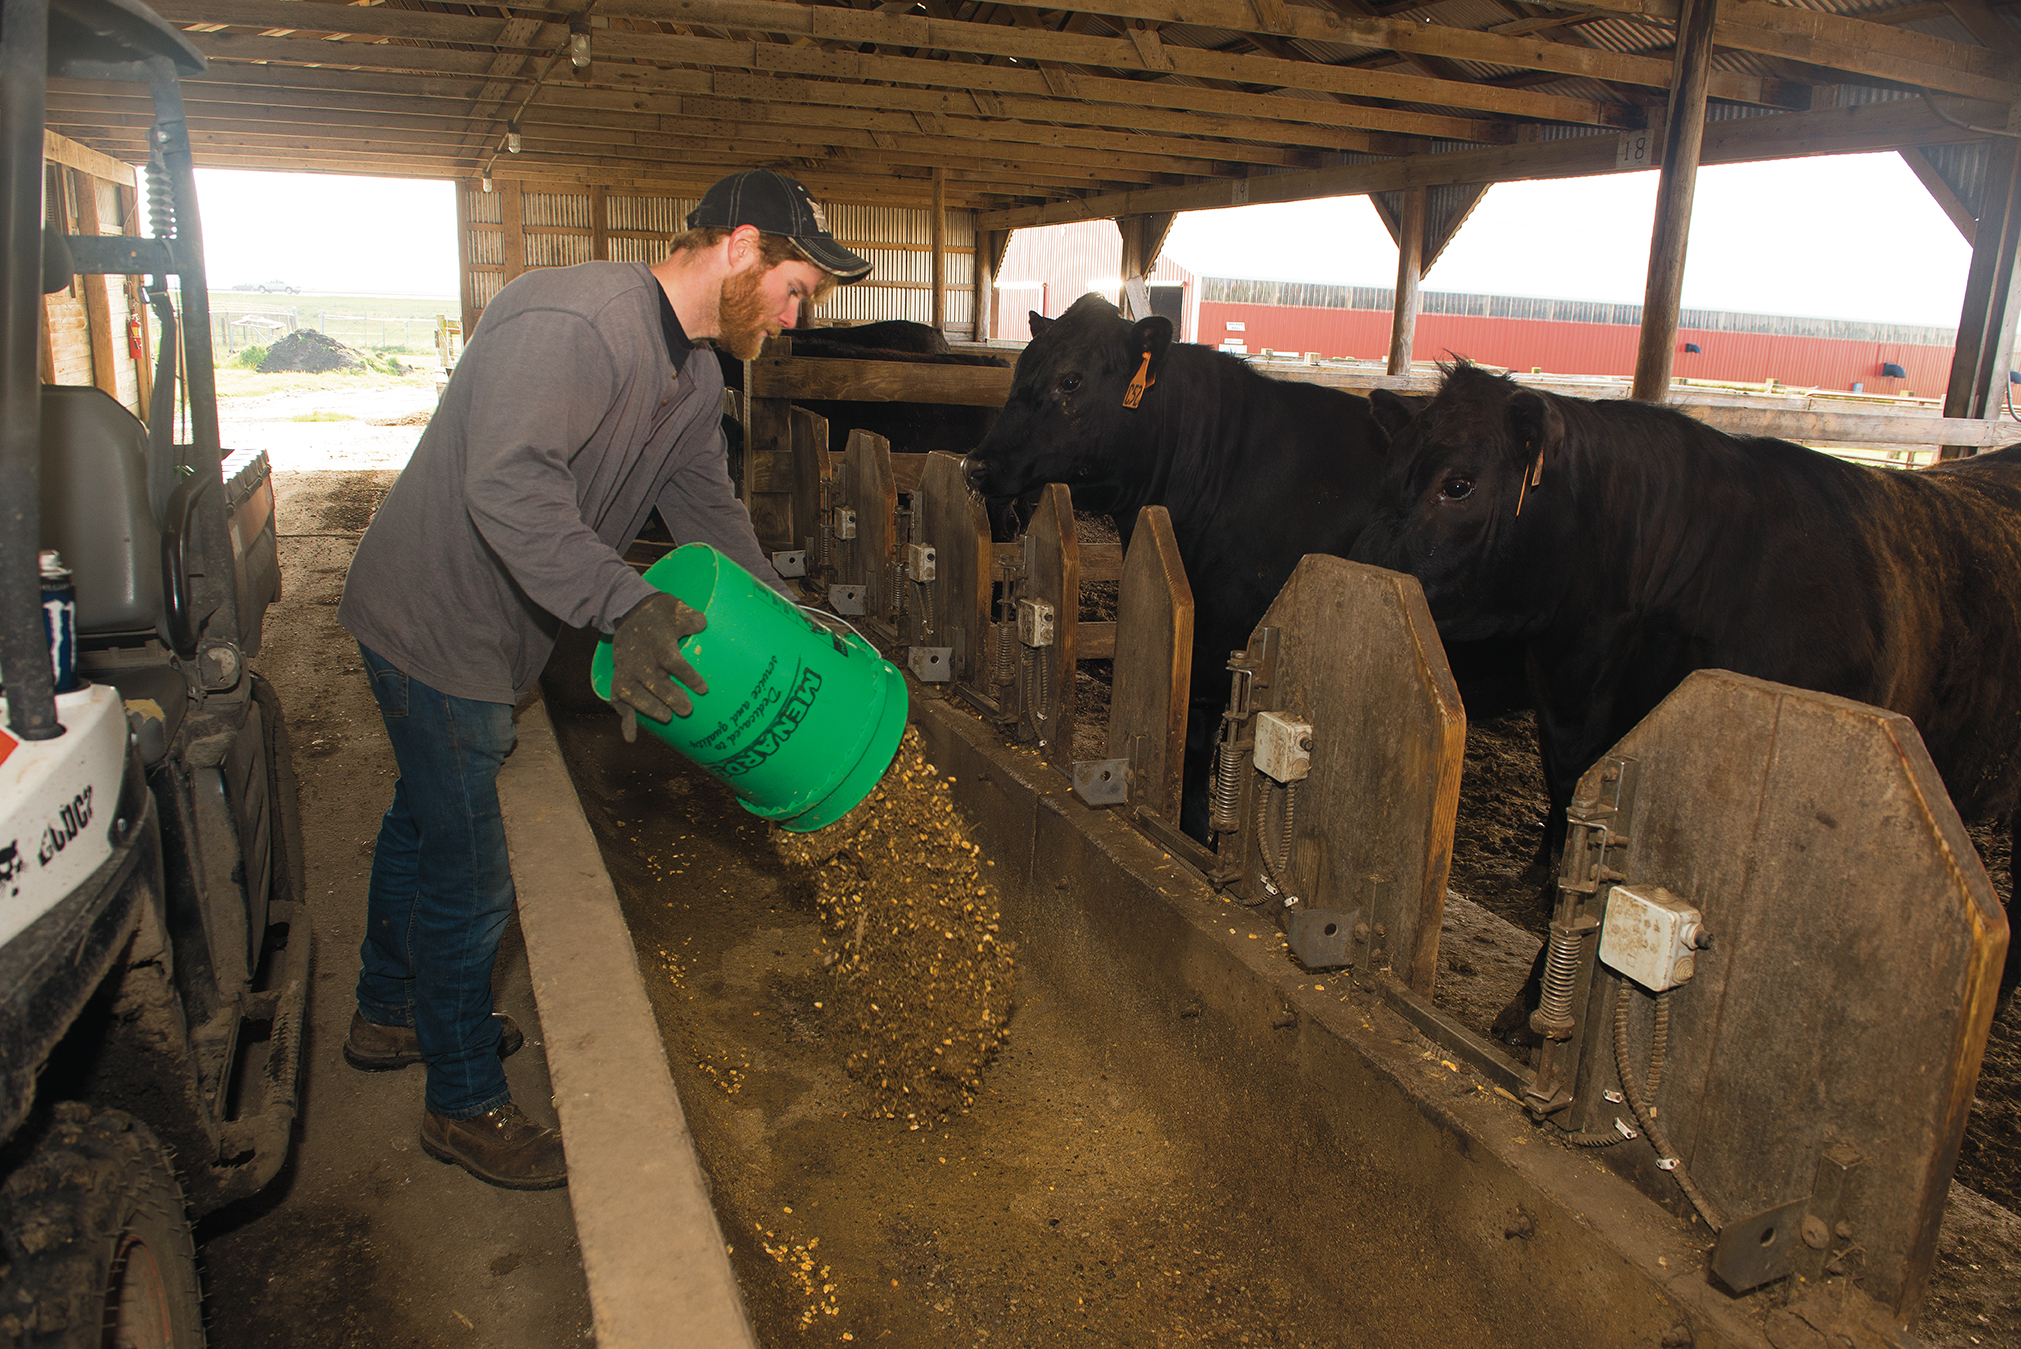 Parmenter pours the feed into bunks, from which the cattle ate throughout the day. During the study, Parmenter filled the bunks between 7 and 8 a.m. every day and allocated about 35 pounds of feed to each animal.